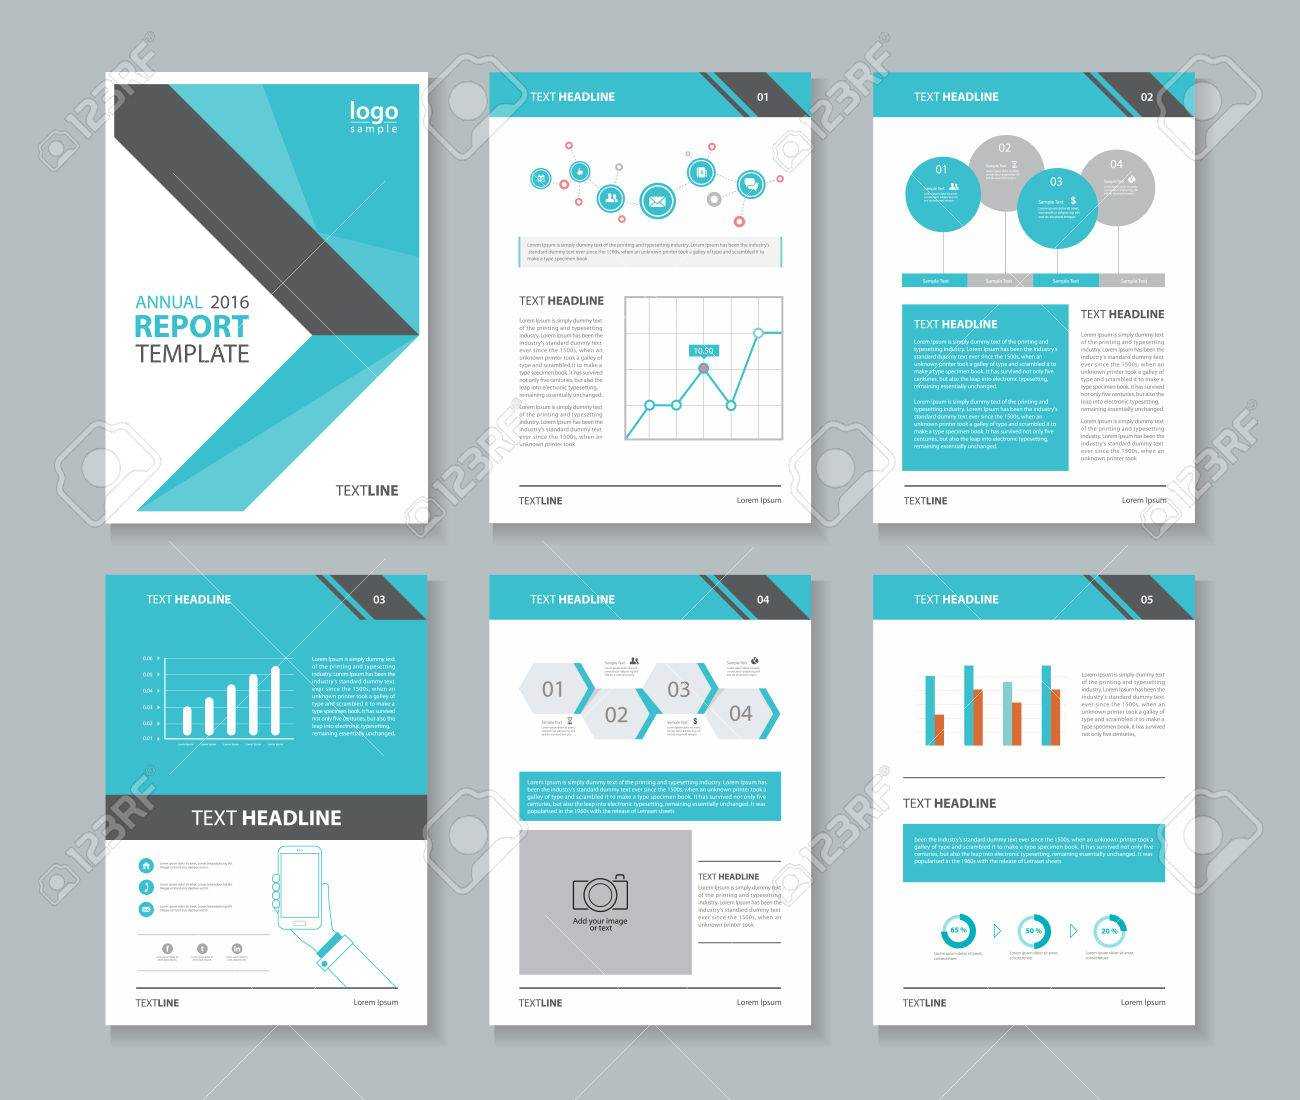 001 Template Ideas Annual Report Layout Frightening Free Pertaining To Annual Report Template Word